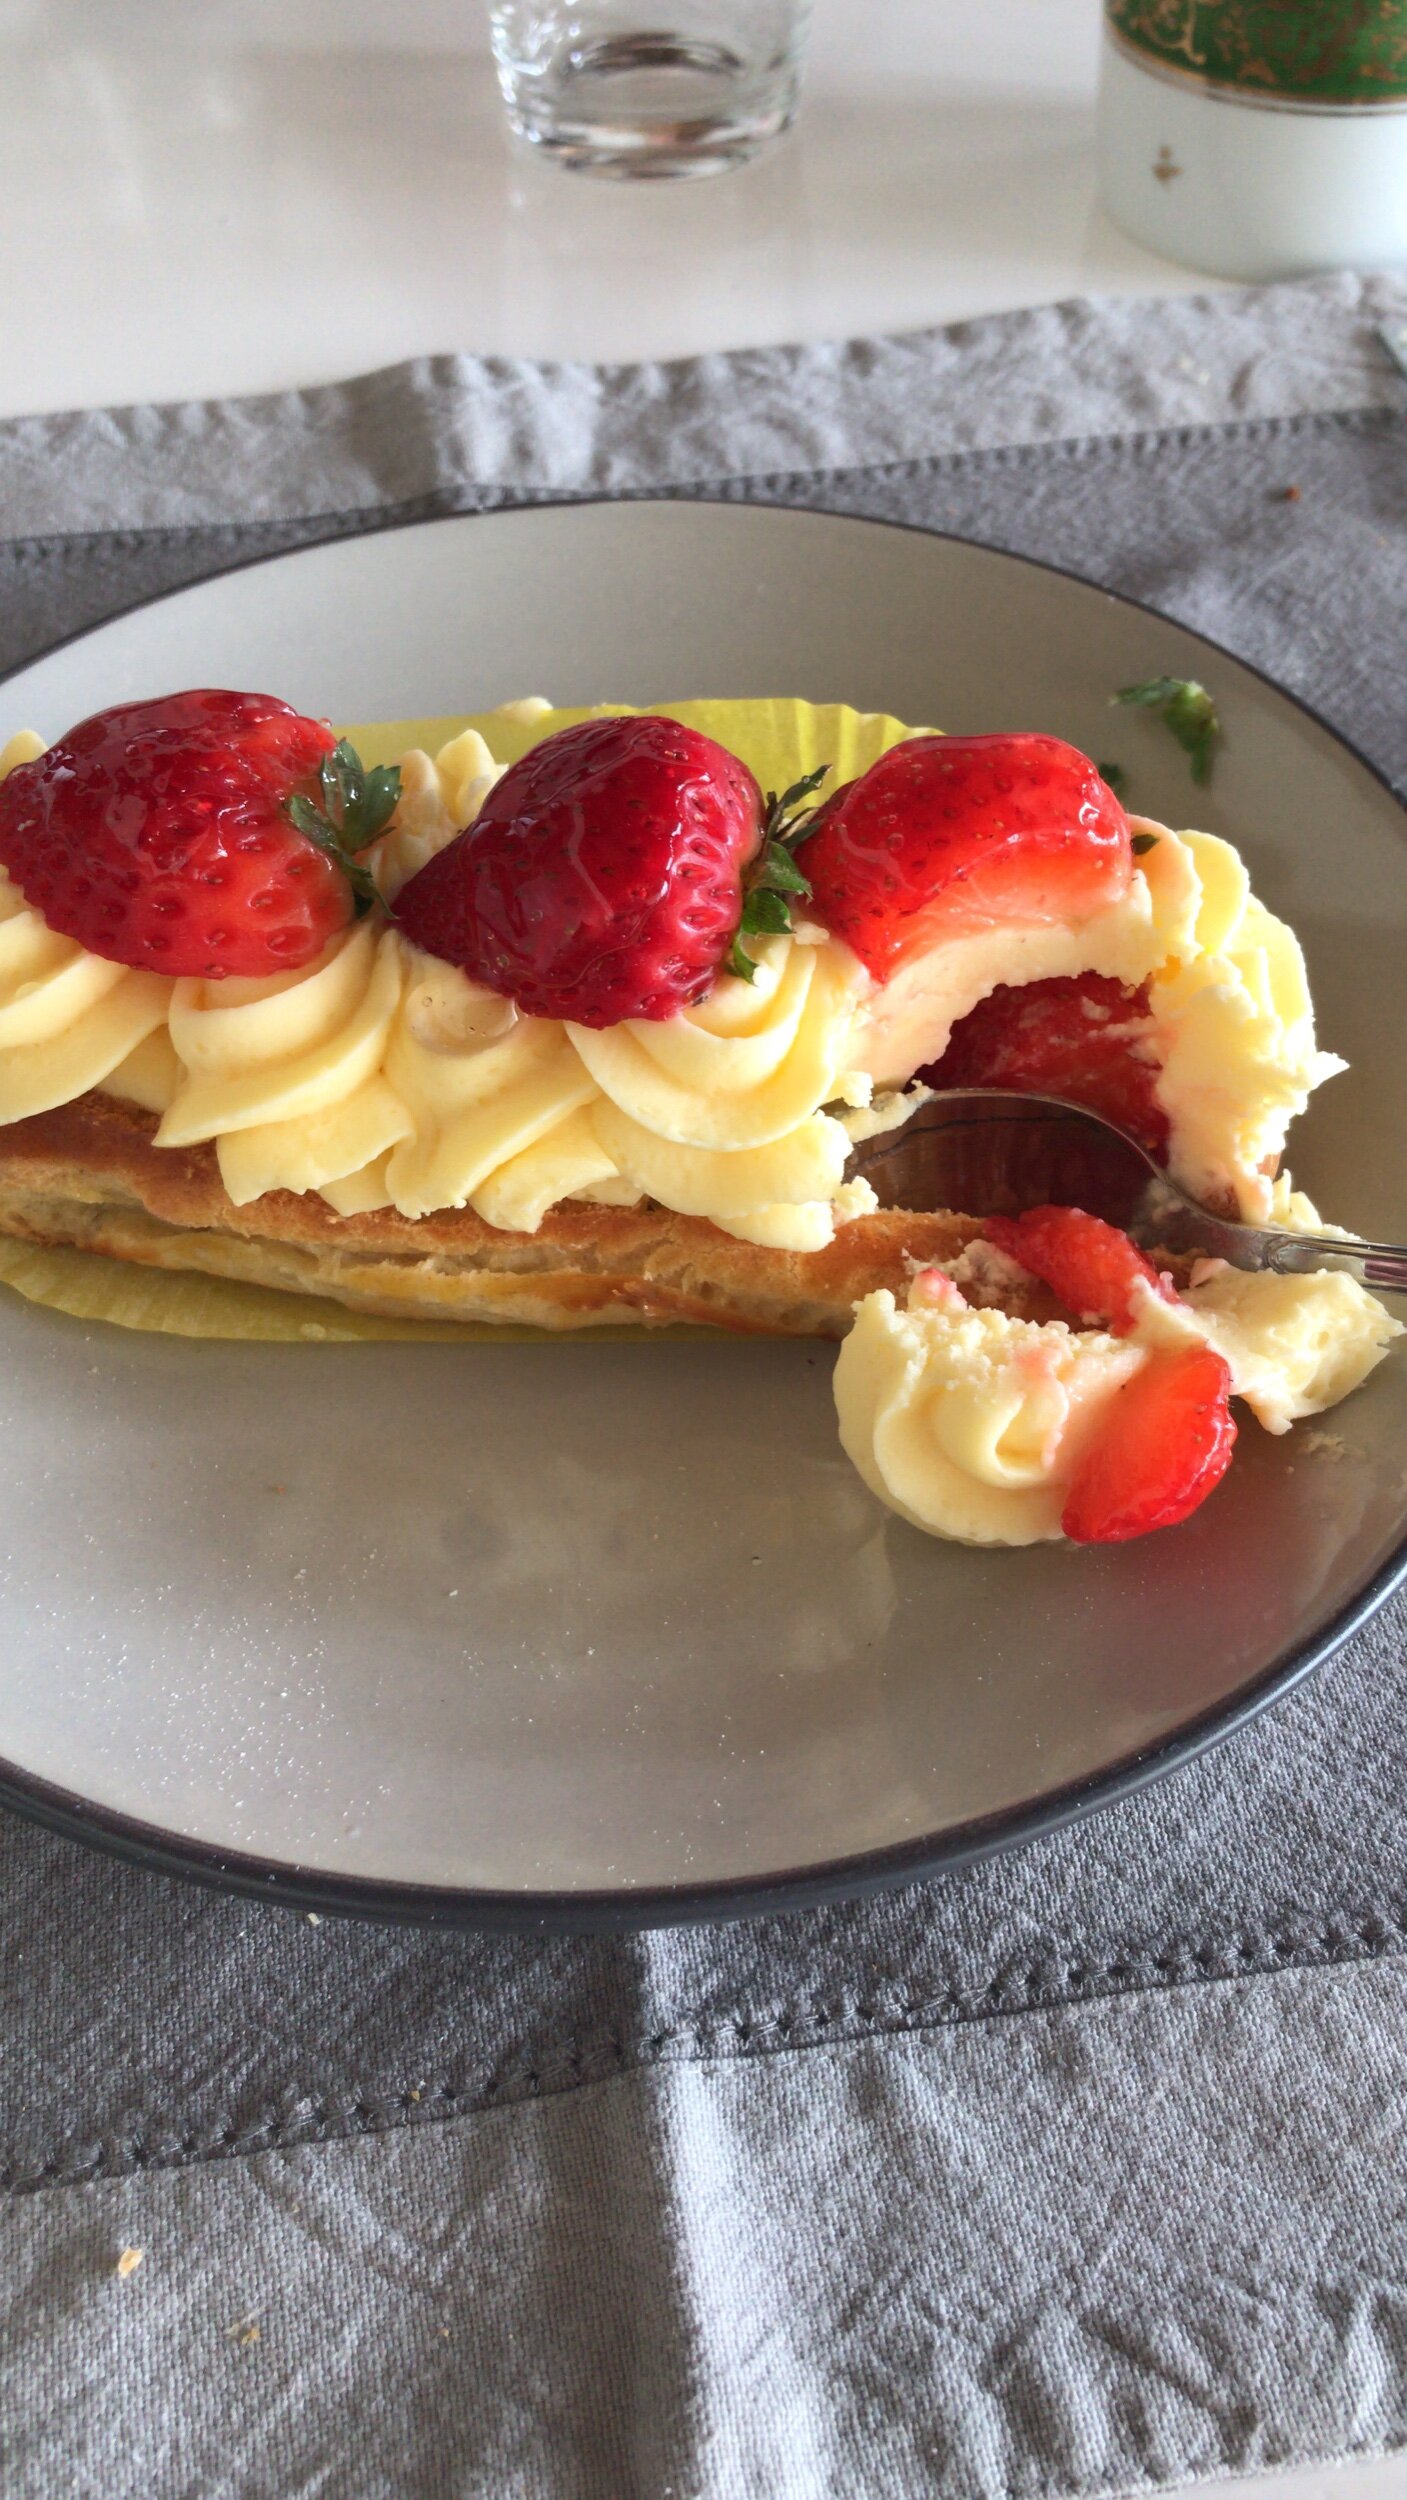 Strawberry and cream tart from the local Patisserie.